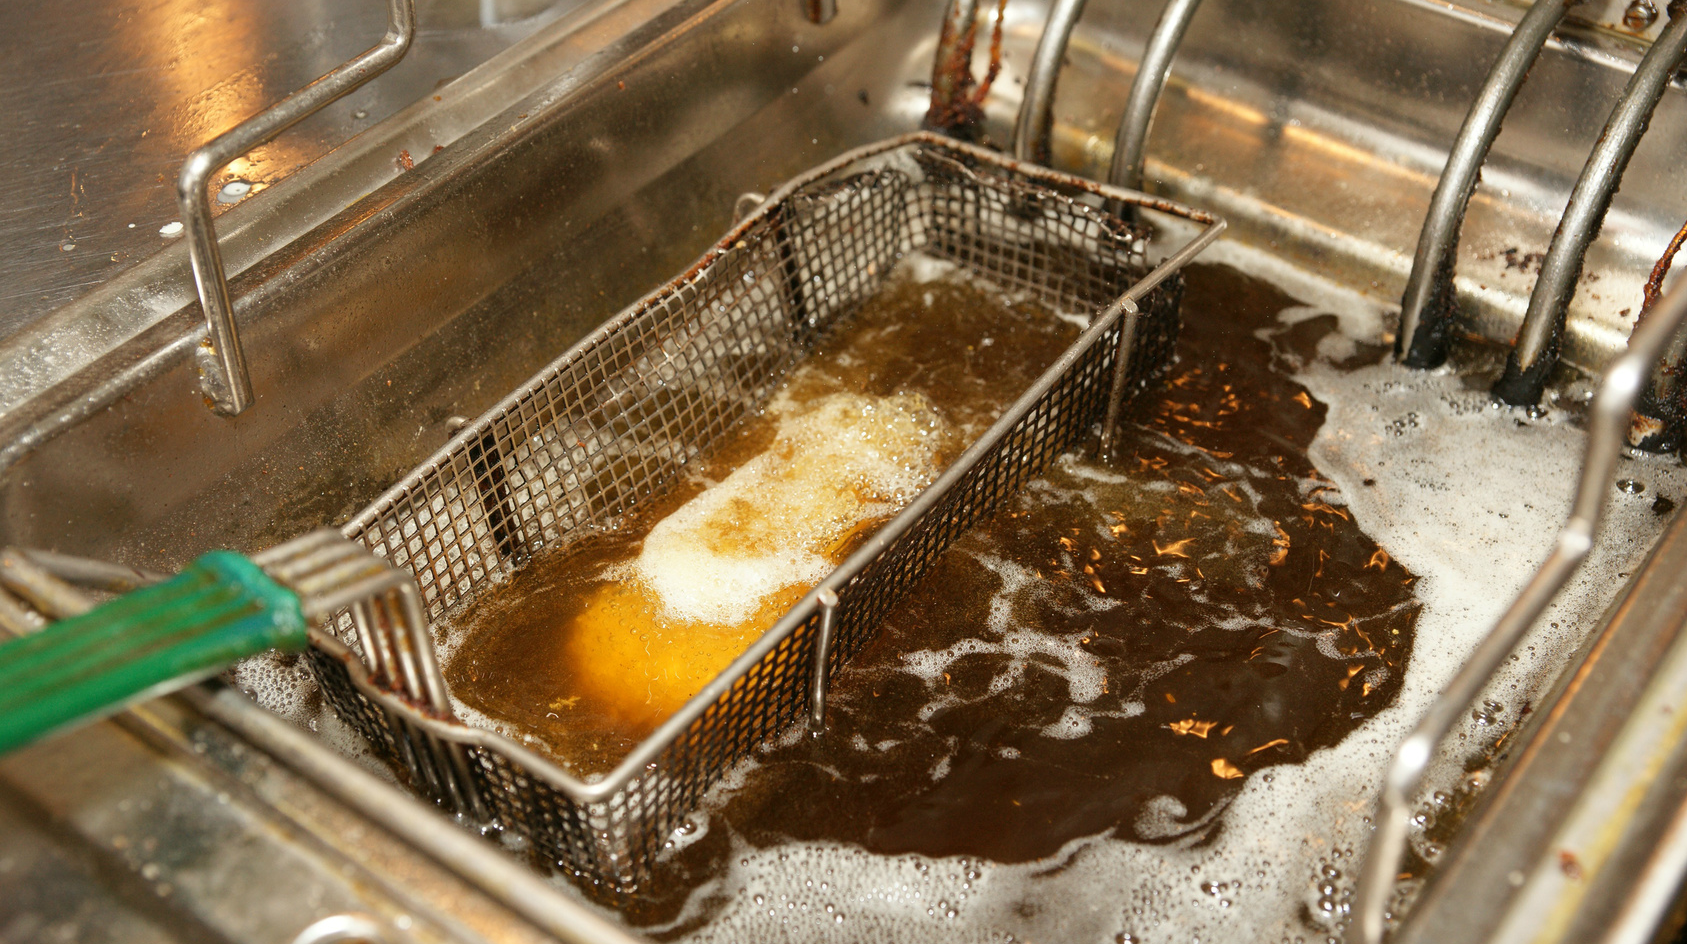 Why Should Restaurants Recycle Their Cooking Oil Smart Alternative Fuels,Simonton Windows Reviews Yelp